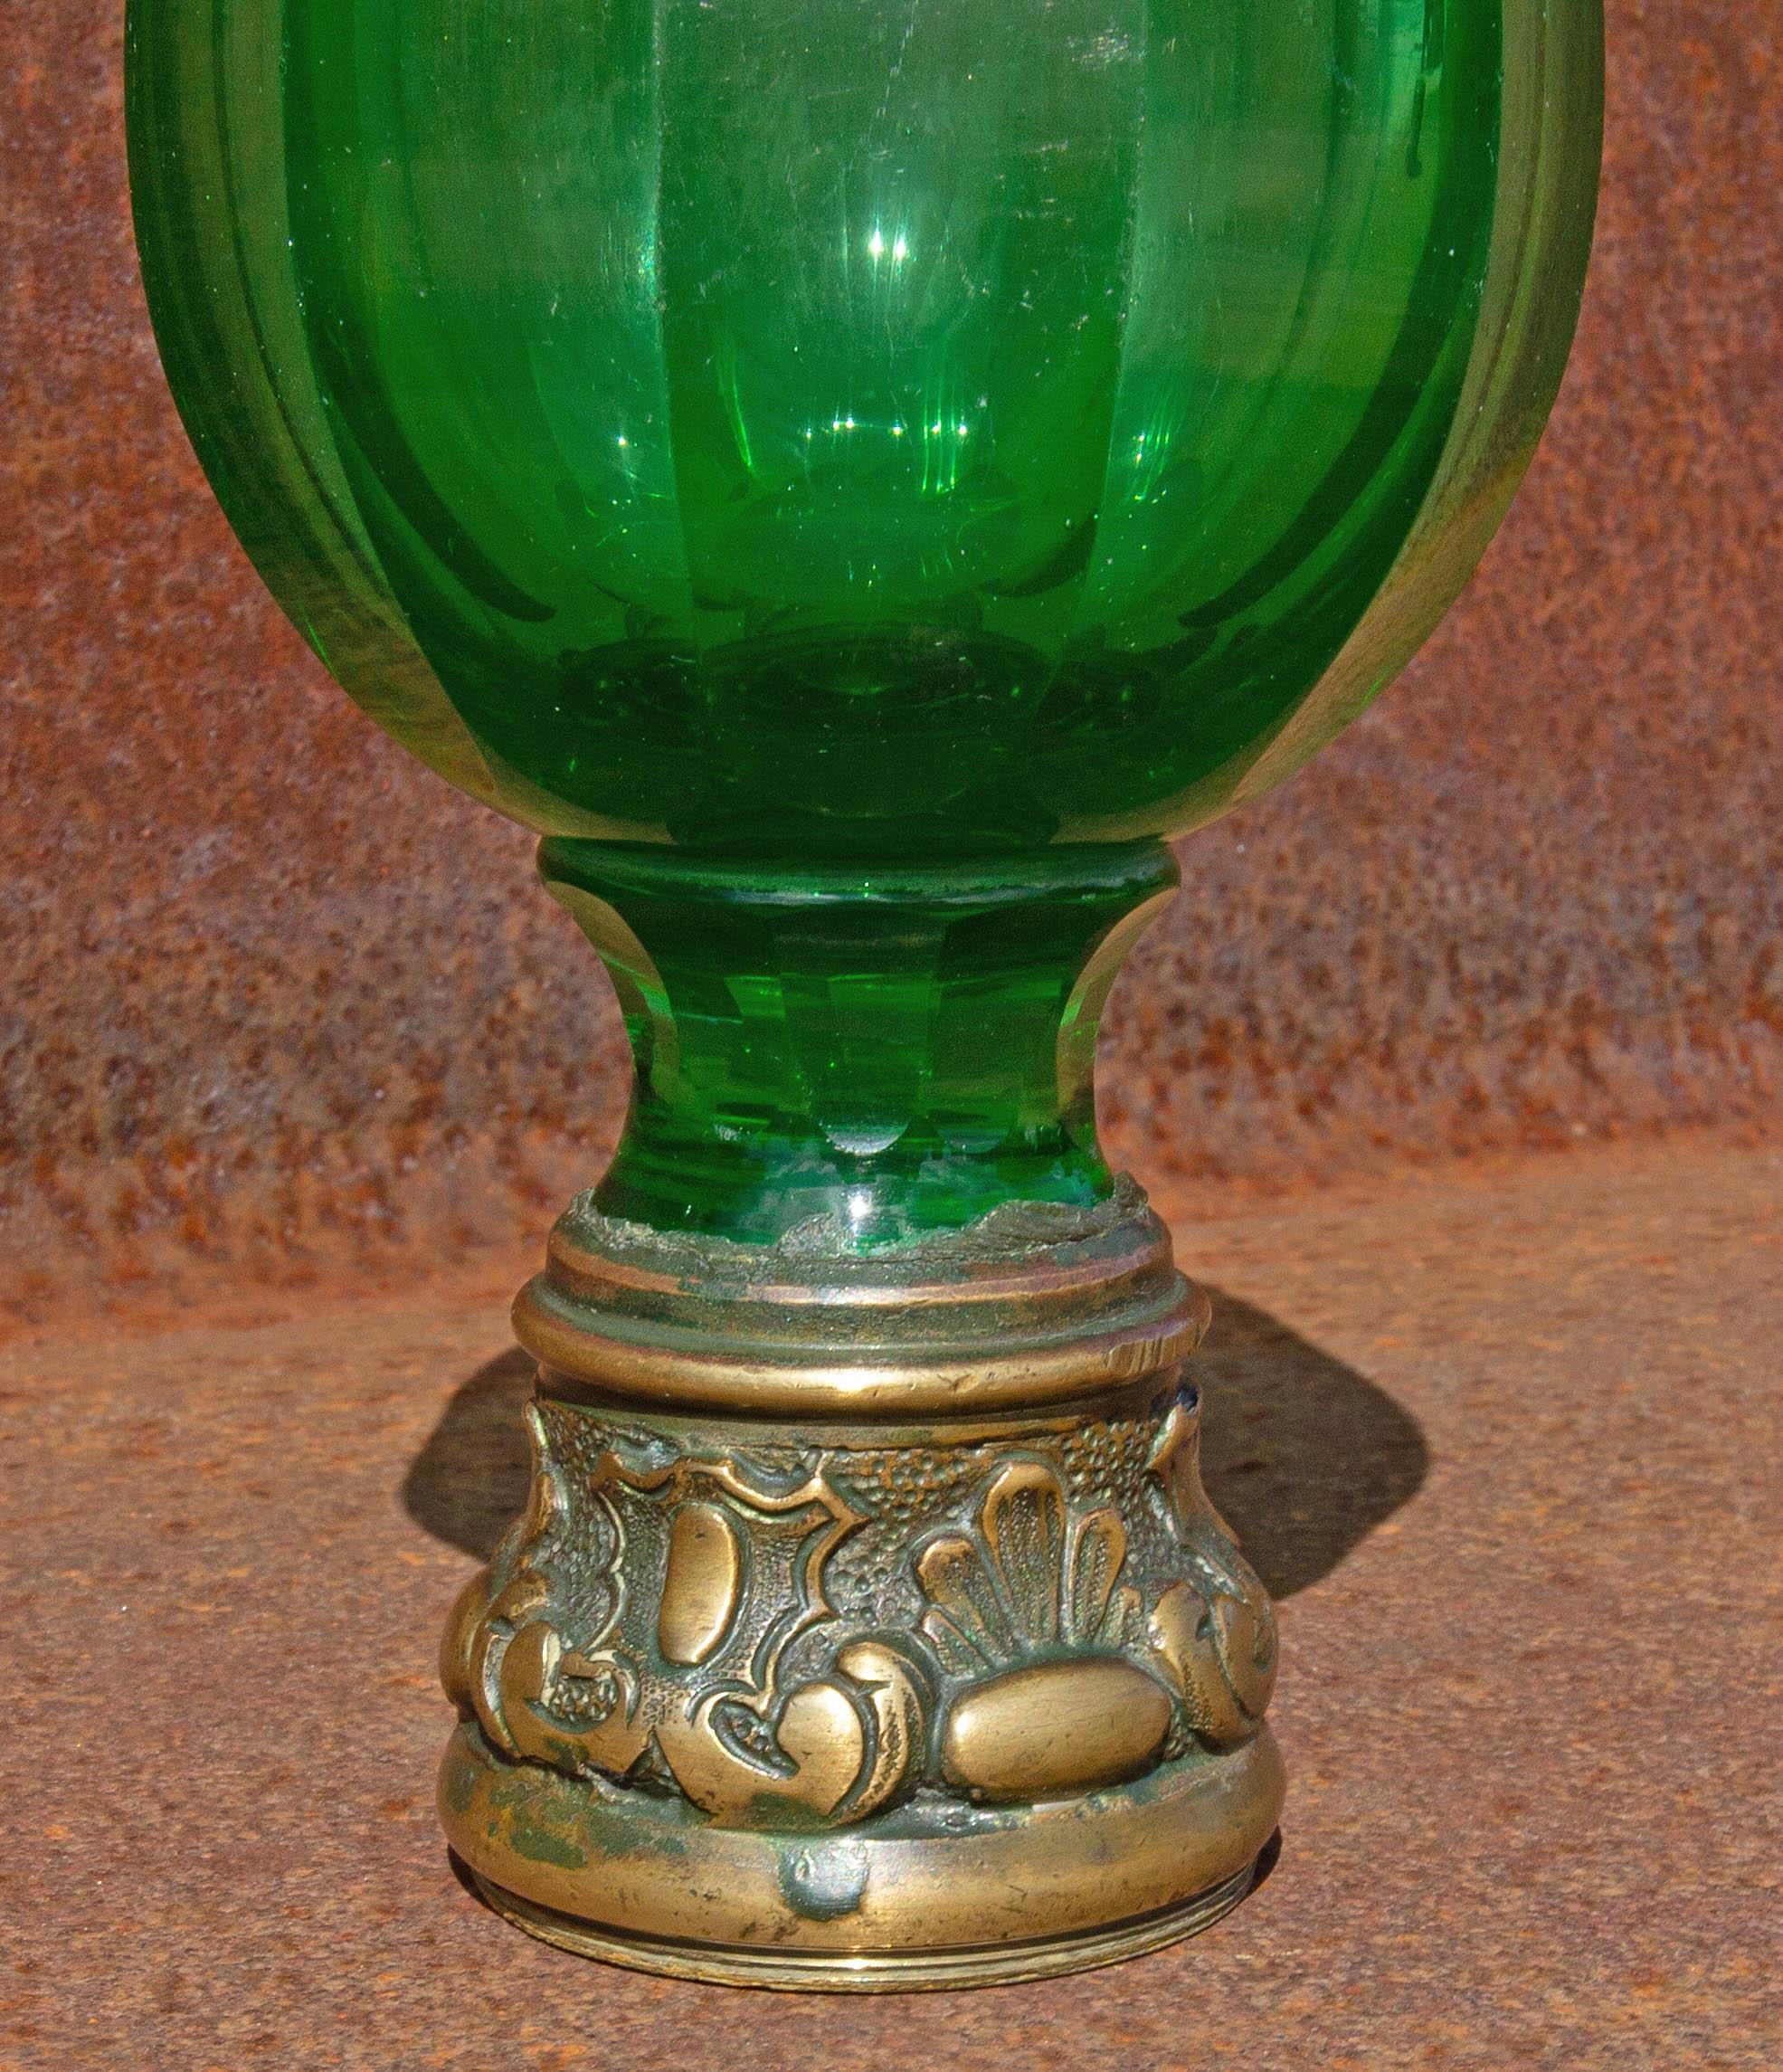 Emerald green cut glass newel post finial with brass mount, 19th century. Measures: 8.5